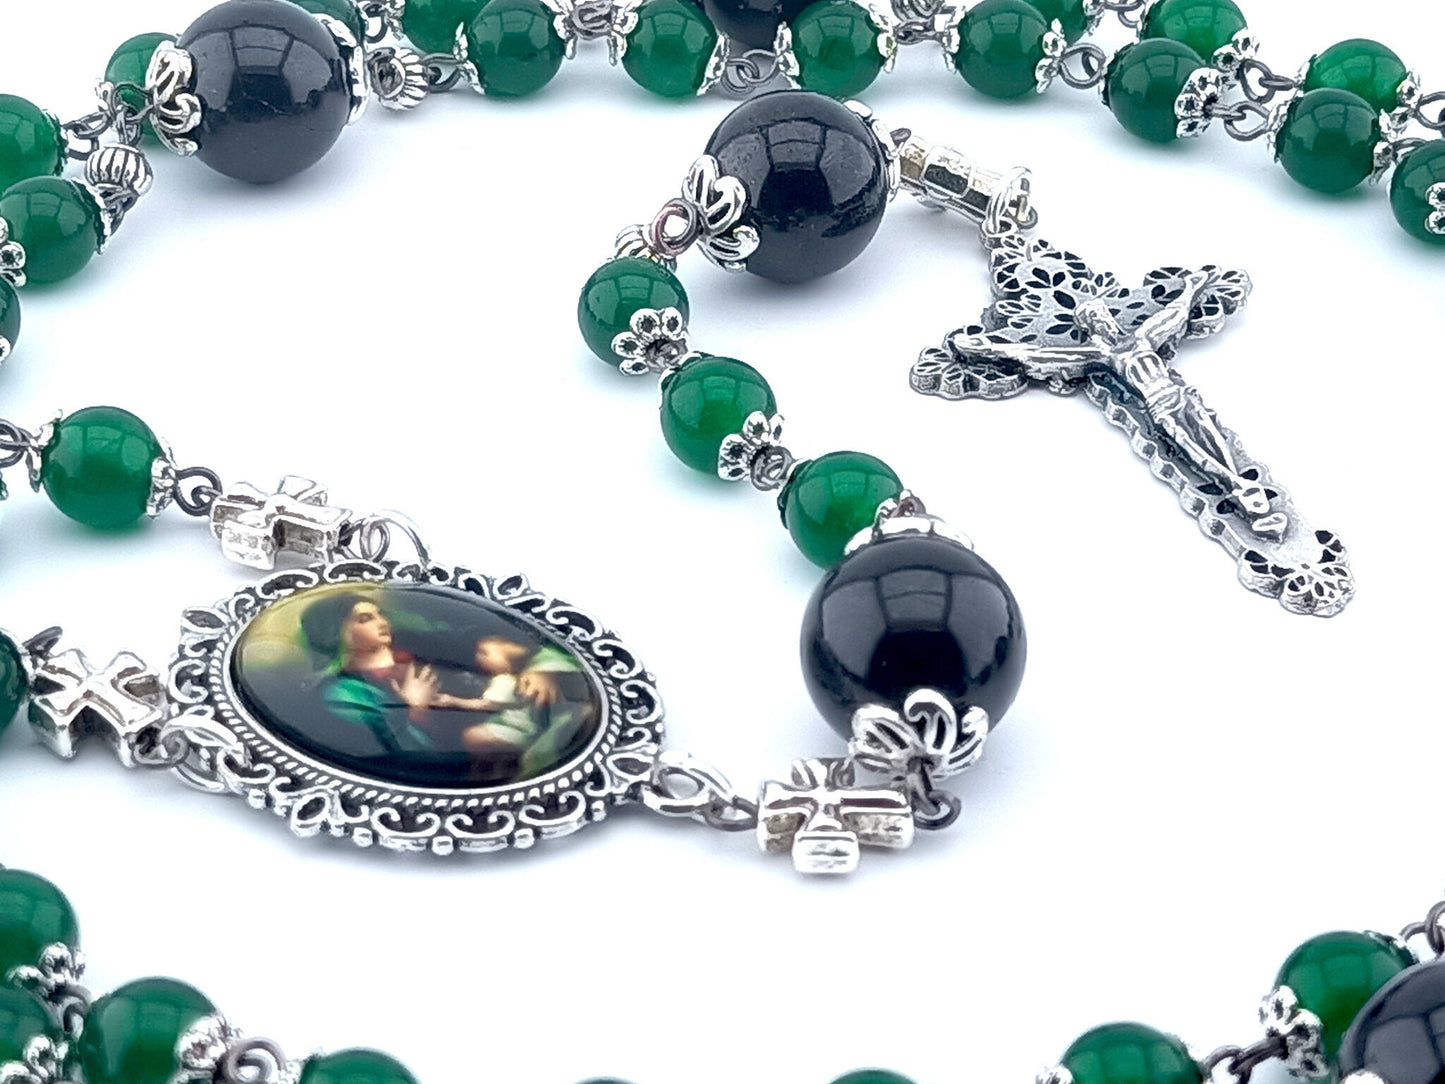 The Nativity unique rosary beads with green jasper gemstone beads, silver crucifix and picture centre medal, large garnet pater beads and silver bead caps and cross linking beads.